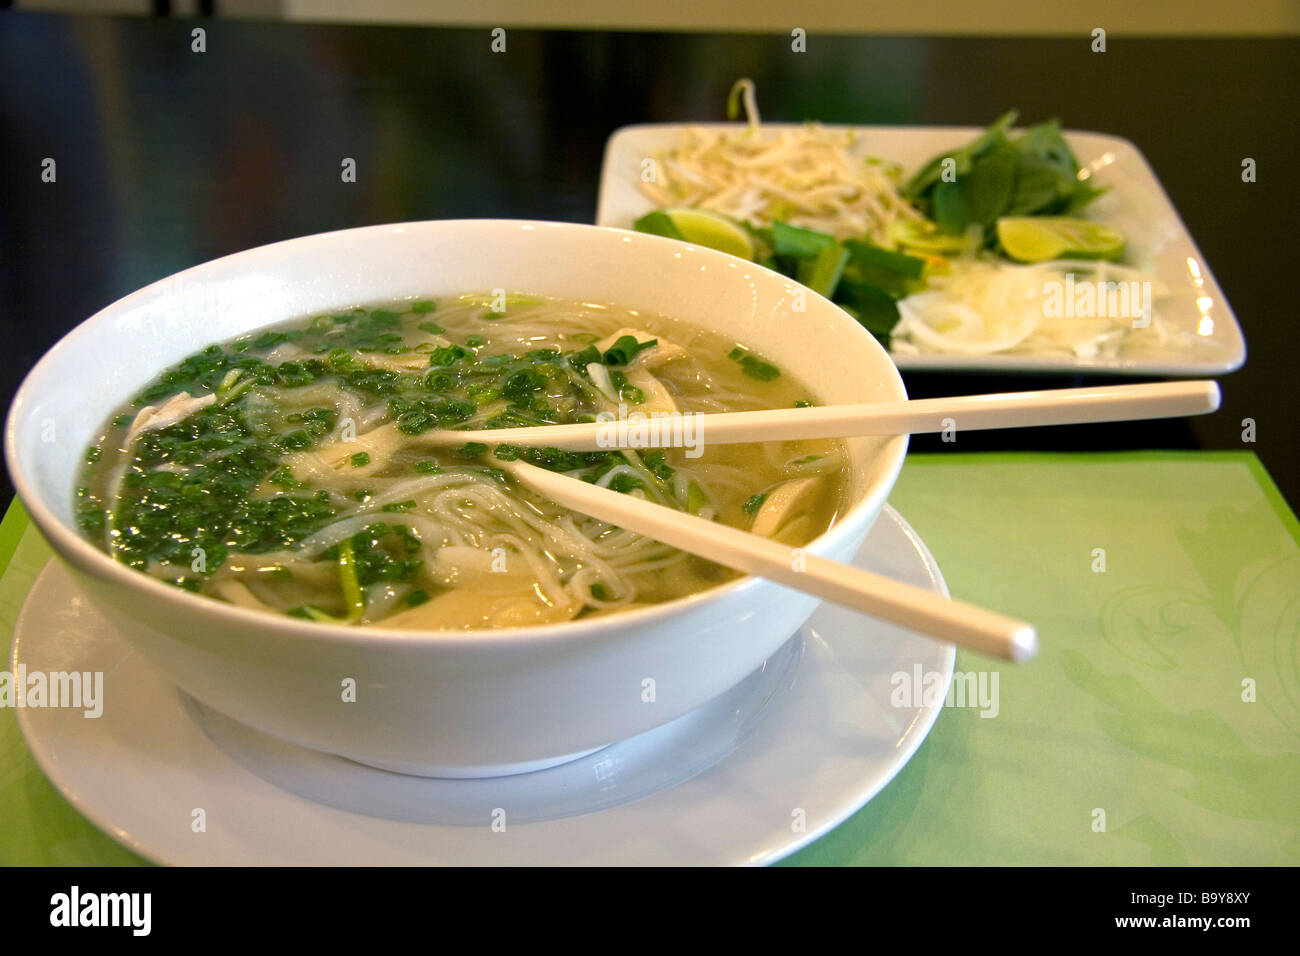 A bowl of Pho Vietnamese rice noodle soup at a restaurant in Ho Chi Minh City Vietnam Stock Photo